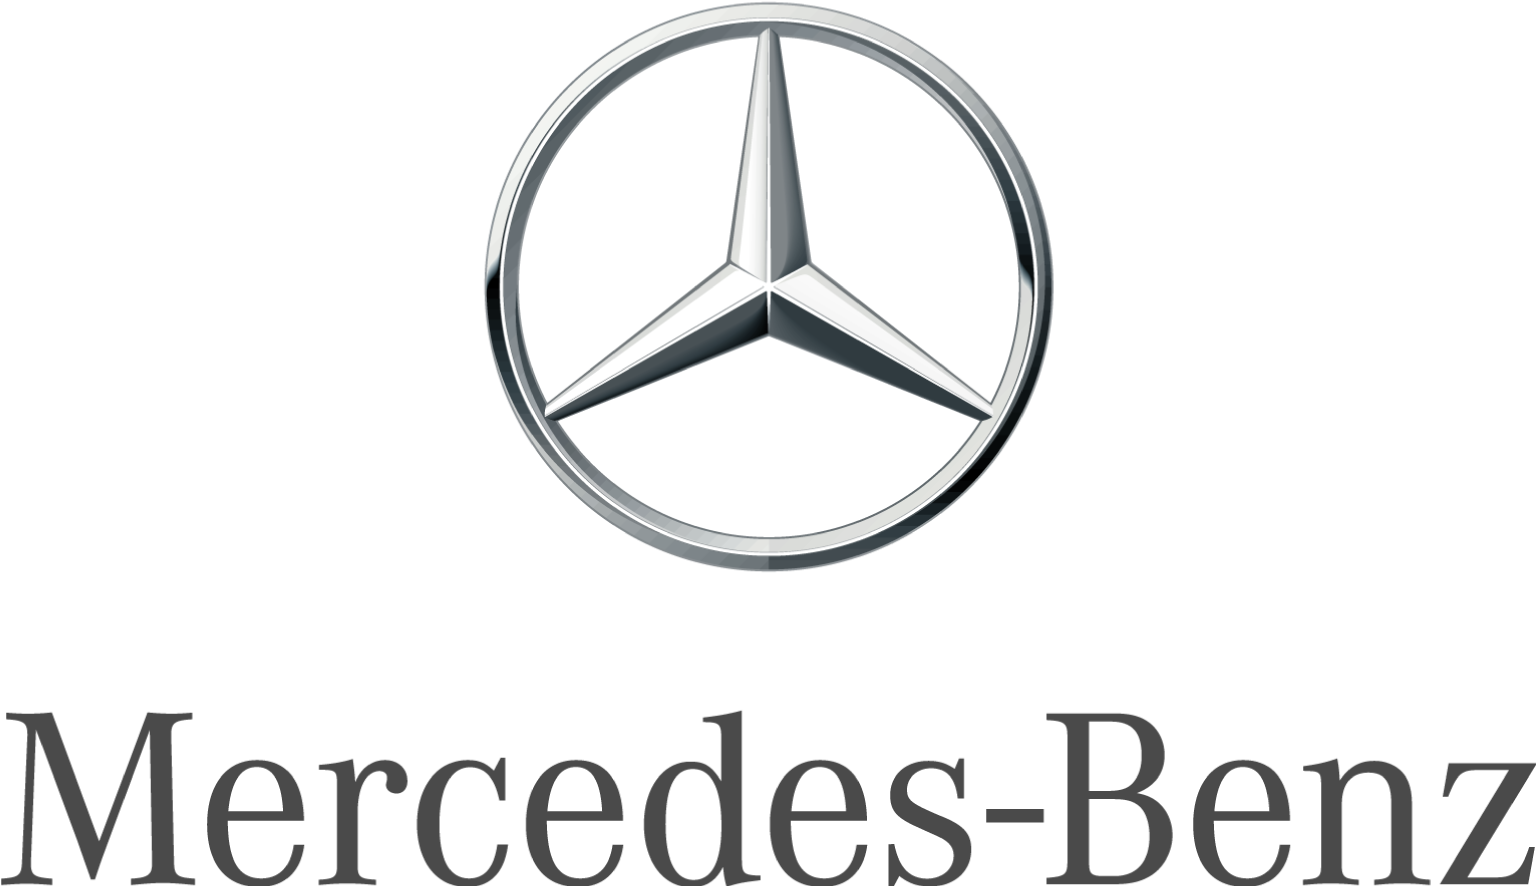 Typical clients include Mercedes Benz.